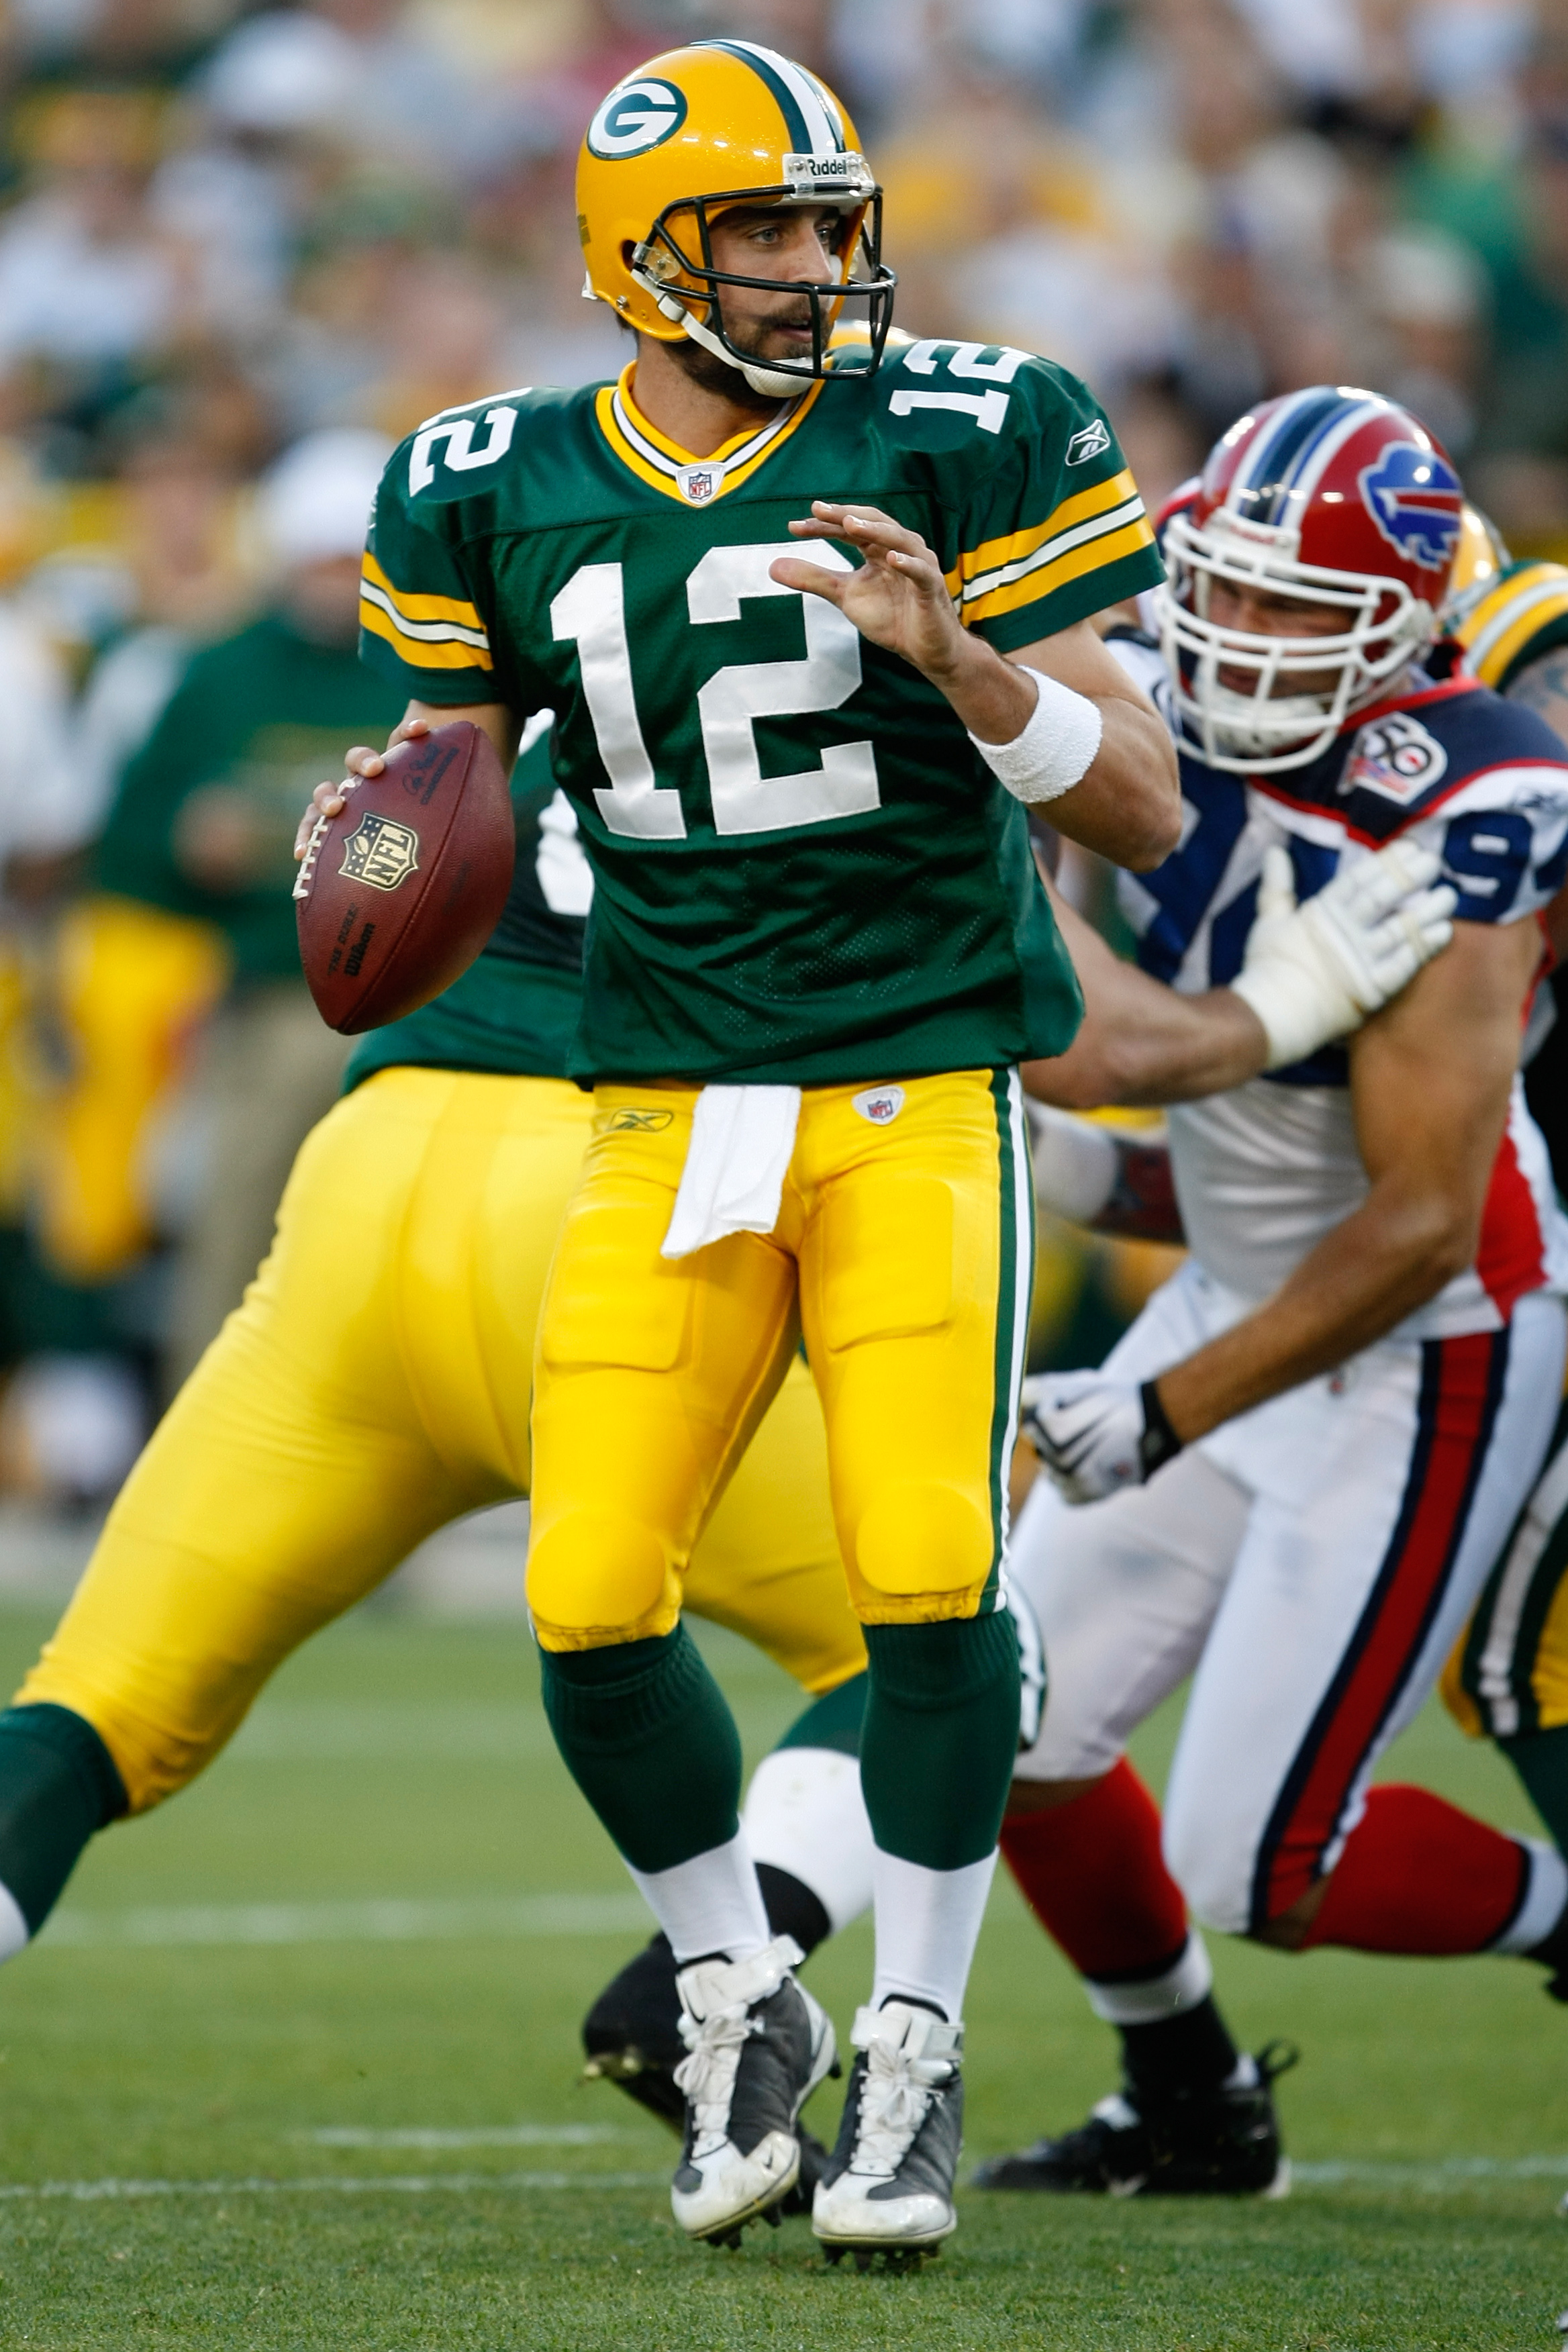 Top takeaways from the Buffalo Bills victory over the Green Bay Packers